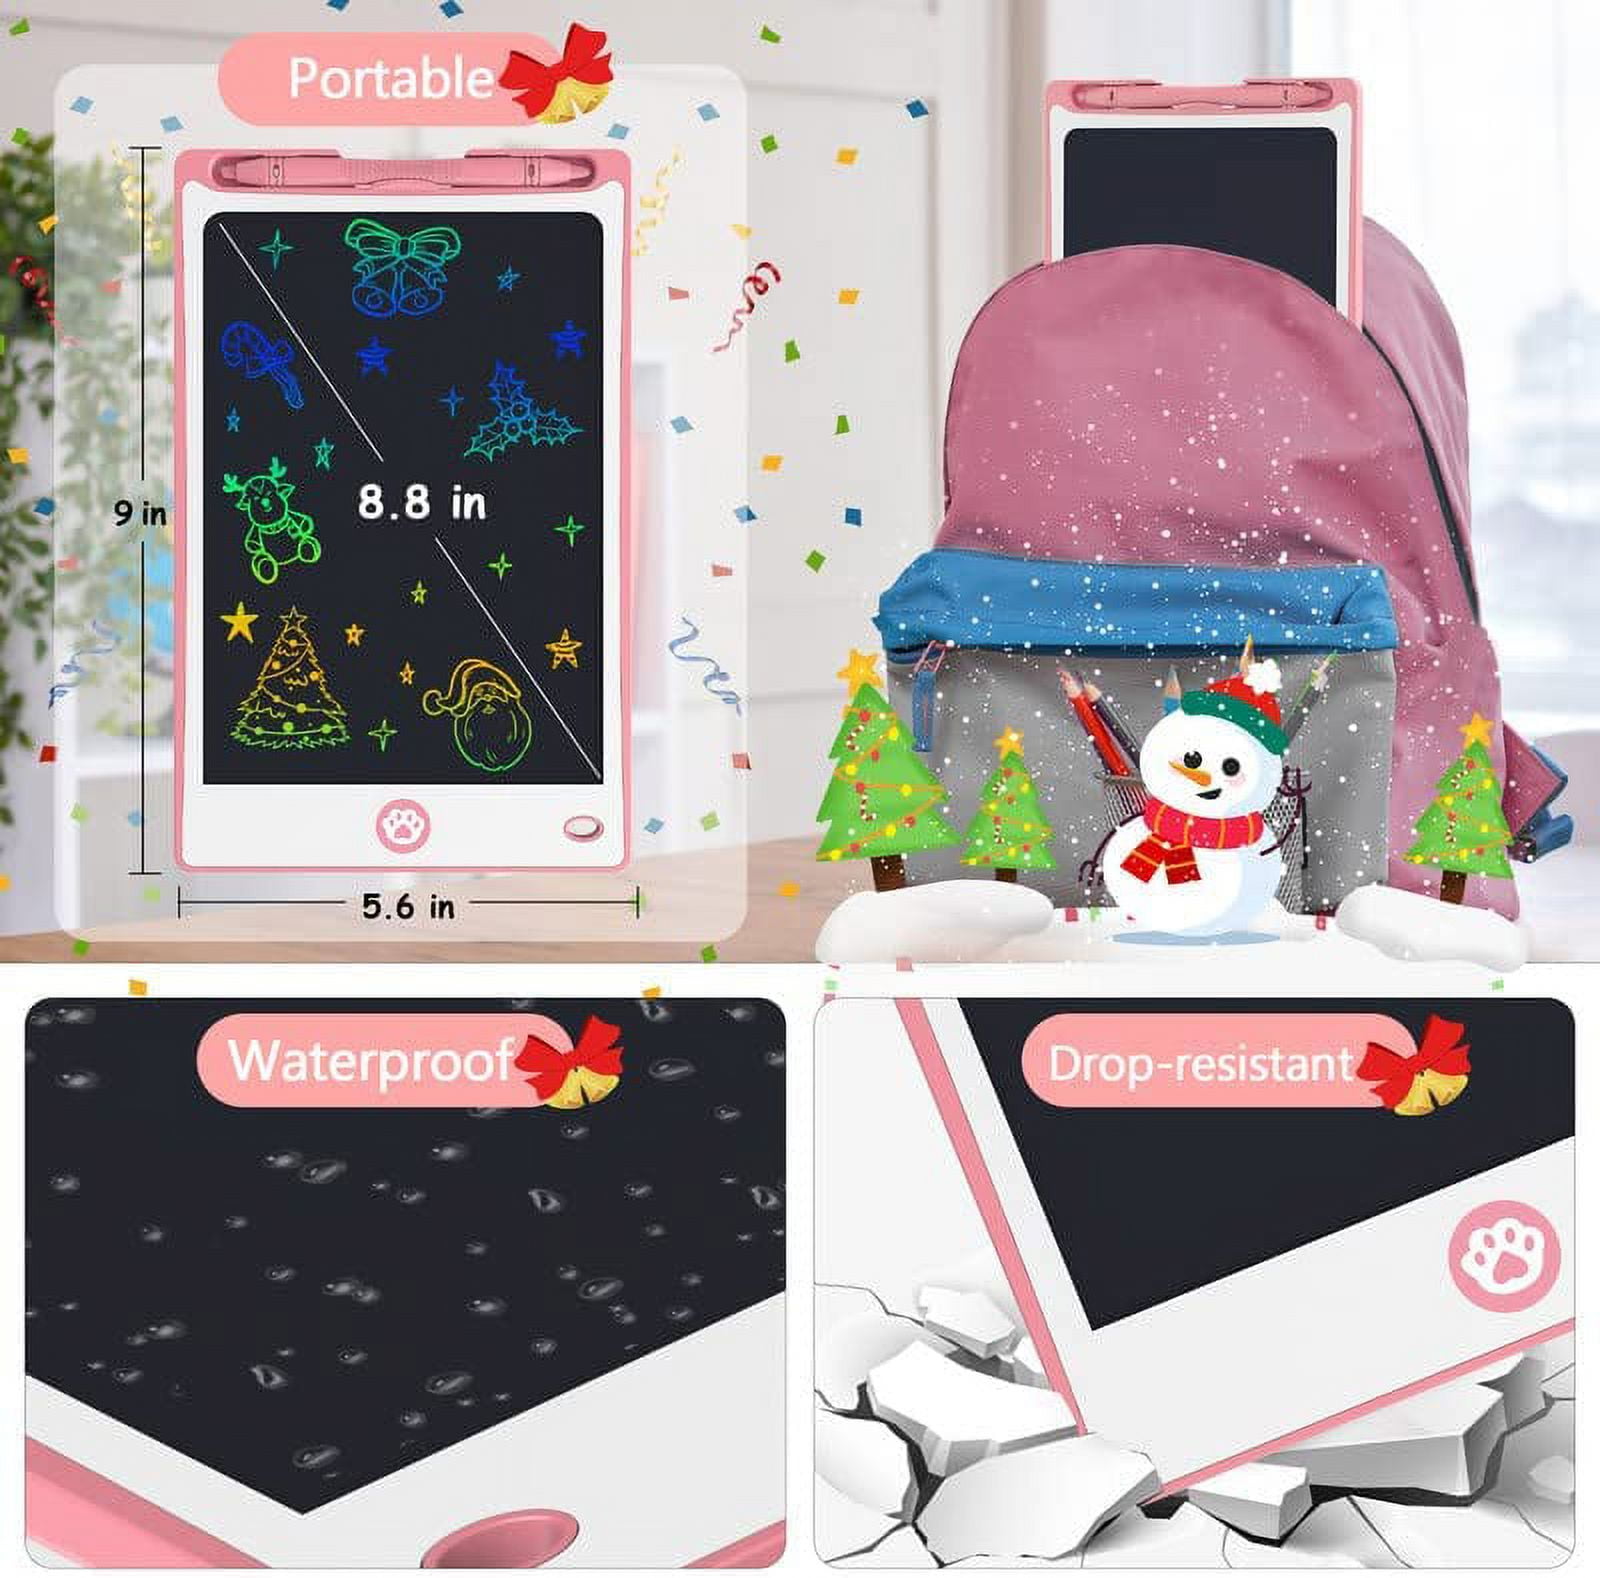 Fugacal Drawing Pad for Kids LCD Writing Pad Painting Tablet 16